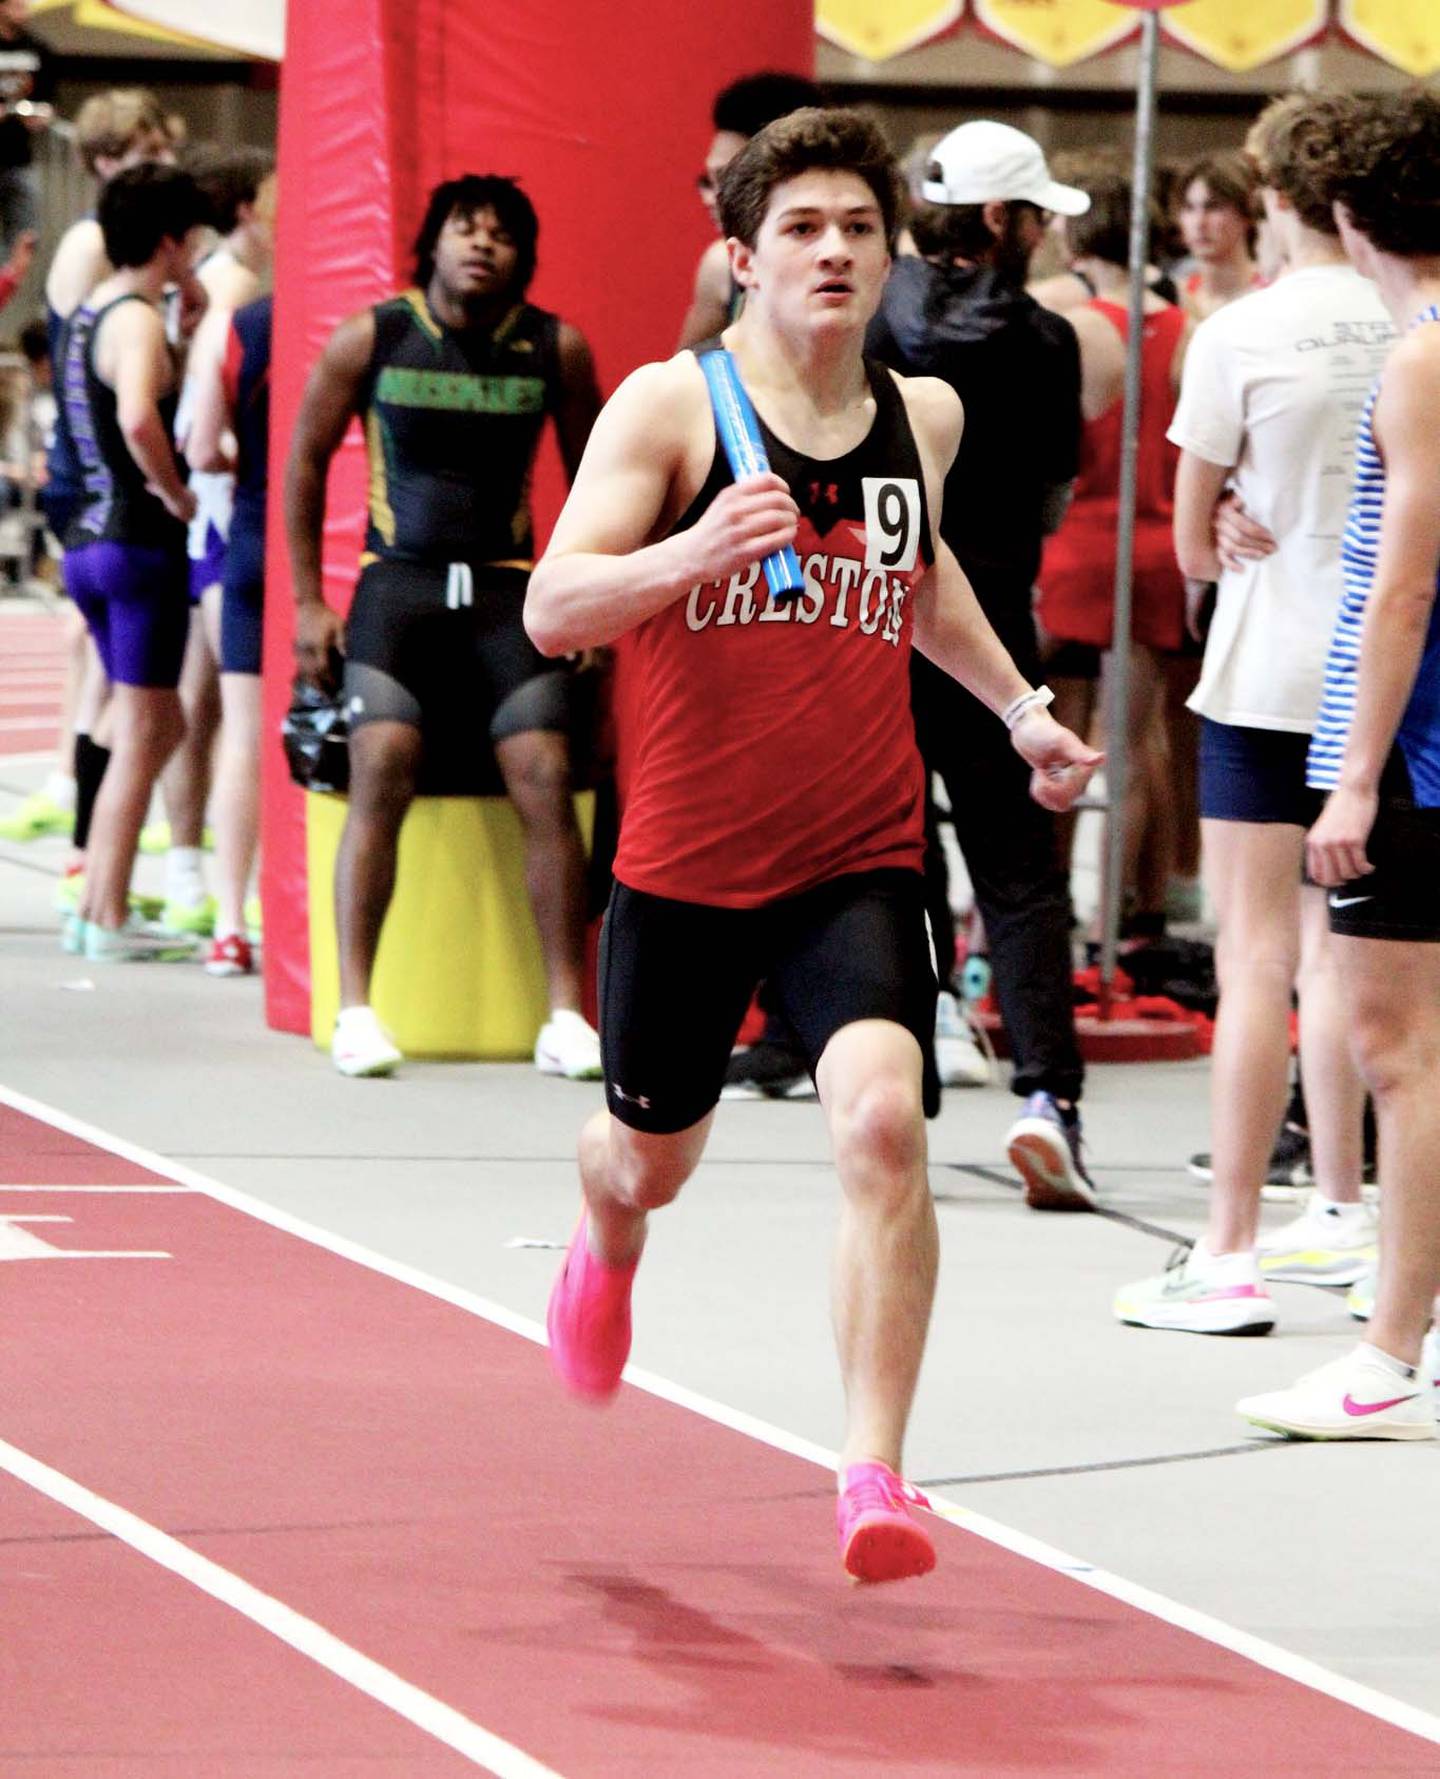 Brandon Briley of Creston competed in three events, placing fifth in the 800m dash.